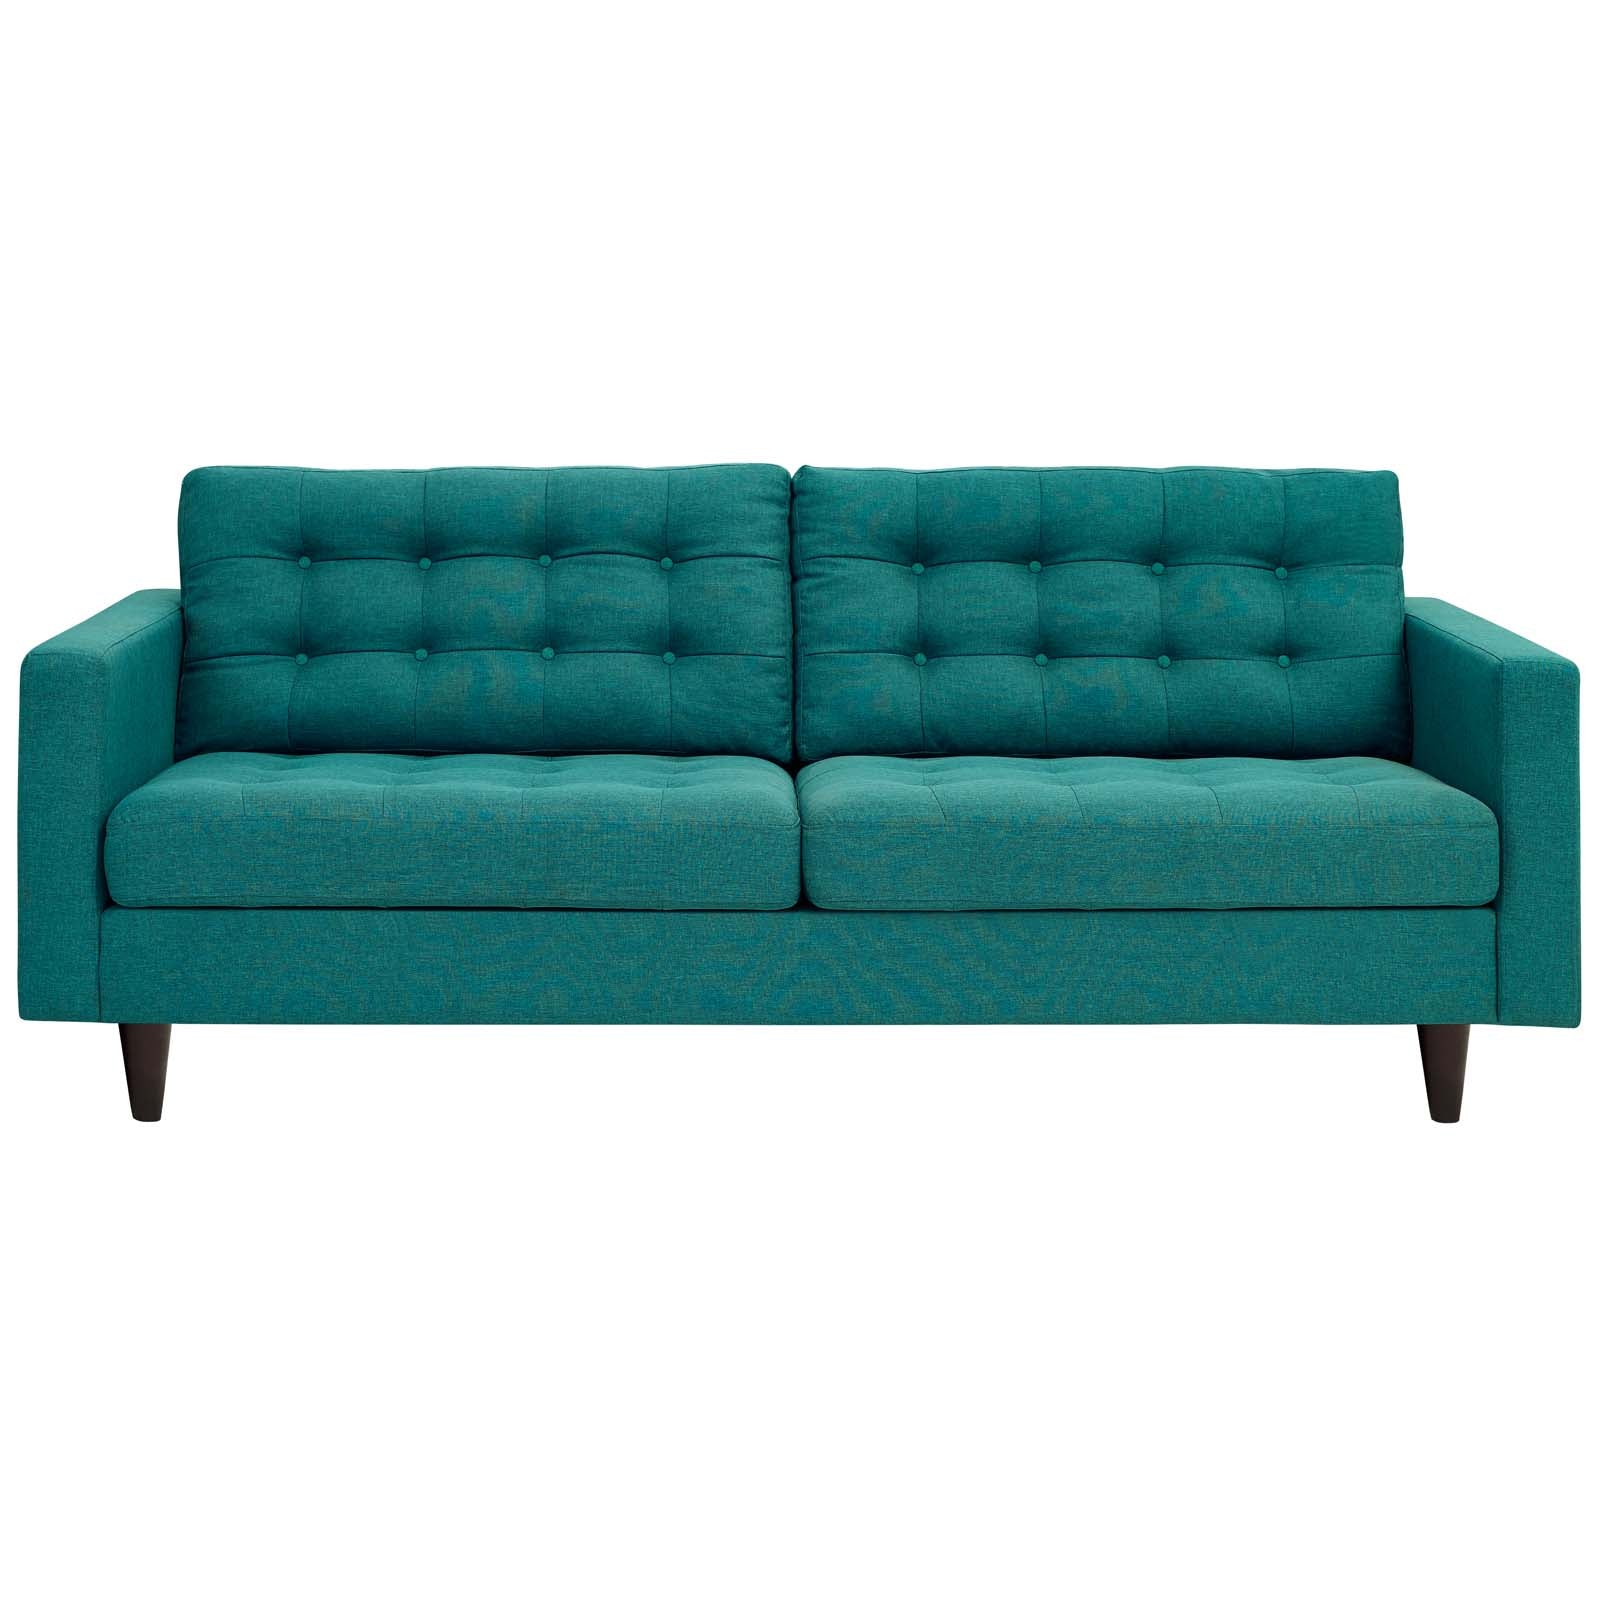 Modway Sofas & Couches - Empress Upholstered Fabric Sofa Teal